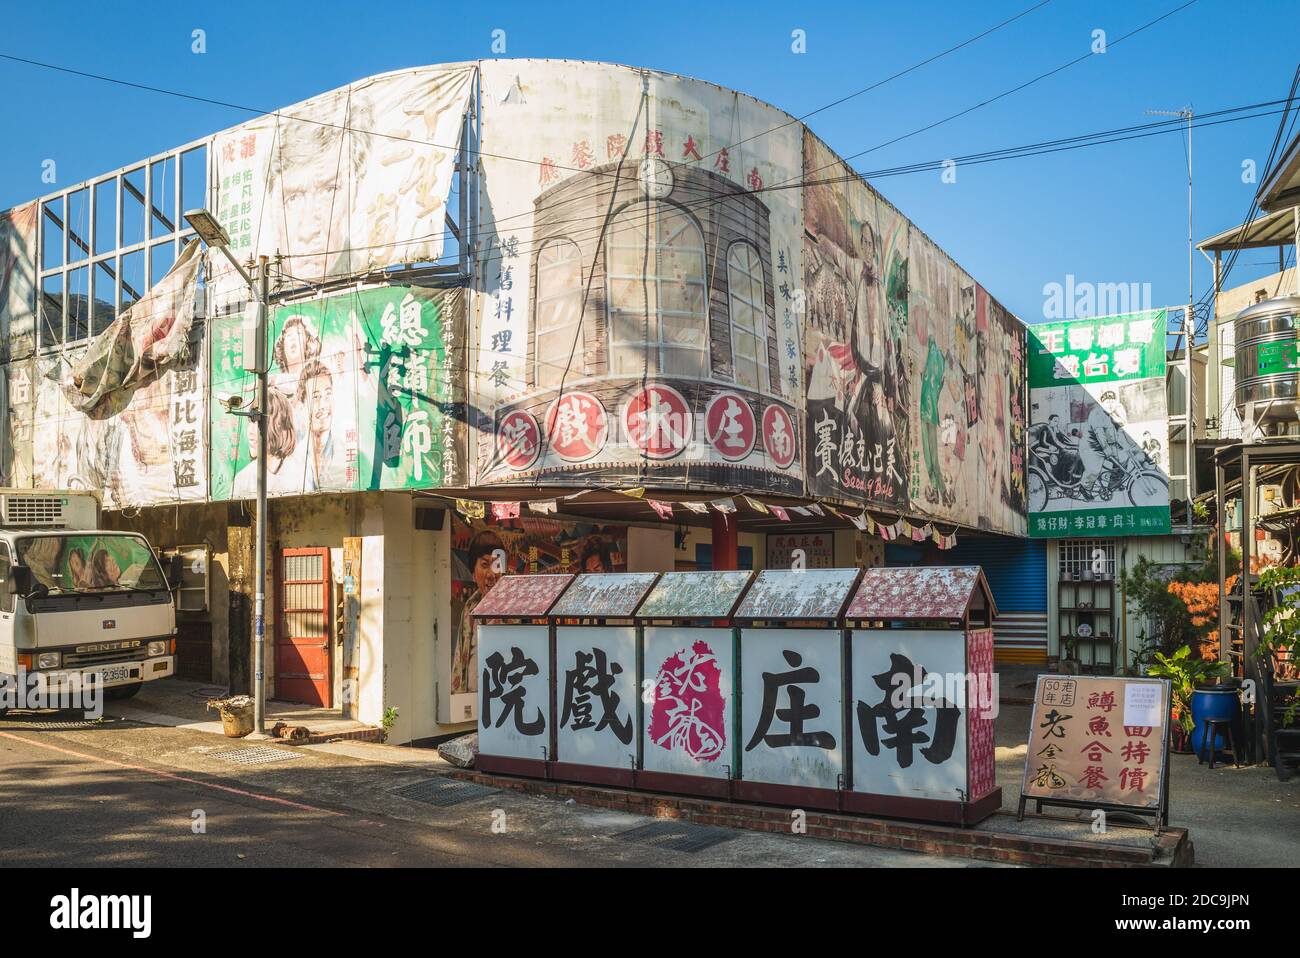 November 19, 2020: The Jindong Movie Theater, an old theater and restaurant located next to nanzhuang old street in miaoli, taiwan. The building is de Stock Photo